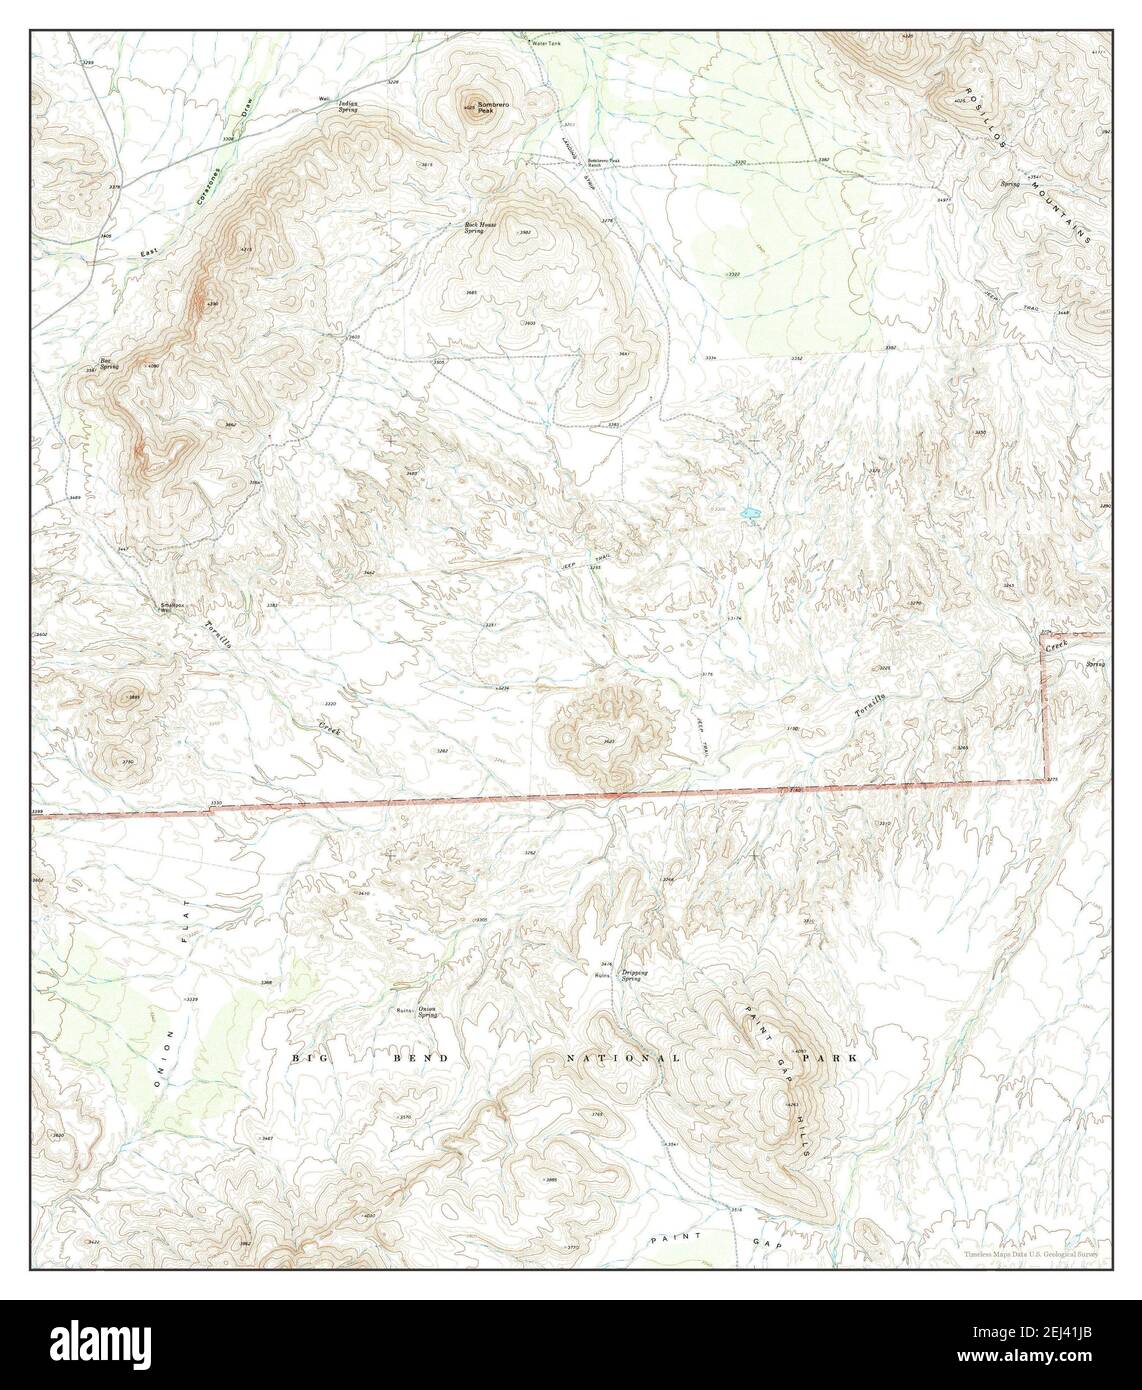 Sombrero Peak, Texas, map 1971, 1:24000, United States of America by Timeless Maps, data U.S. Geological Survey Stock Photo